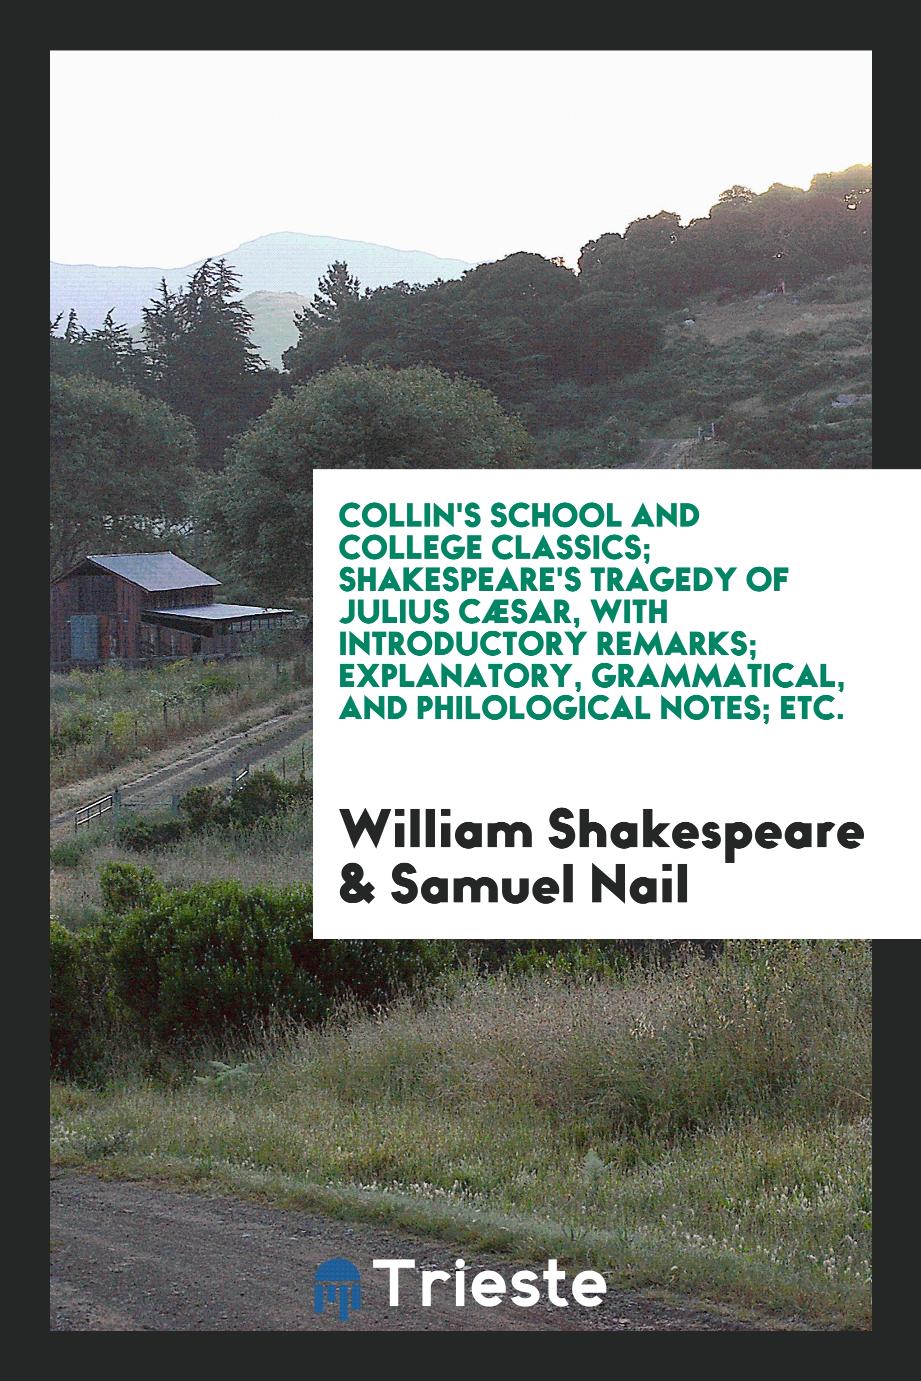 Collin's School and College Classics; Shakespeare's Tragedy of Julius CæSar, with Introductory Remarks; Explanatory, Grammatical, and Philological Notes; Etc.